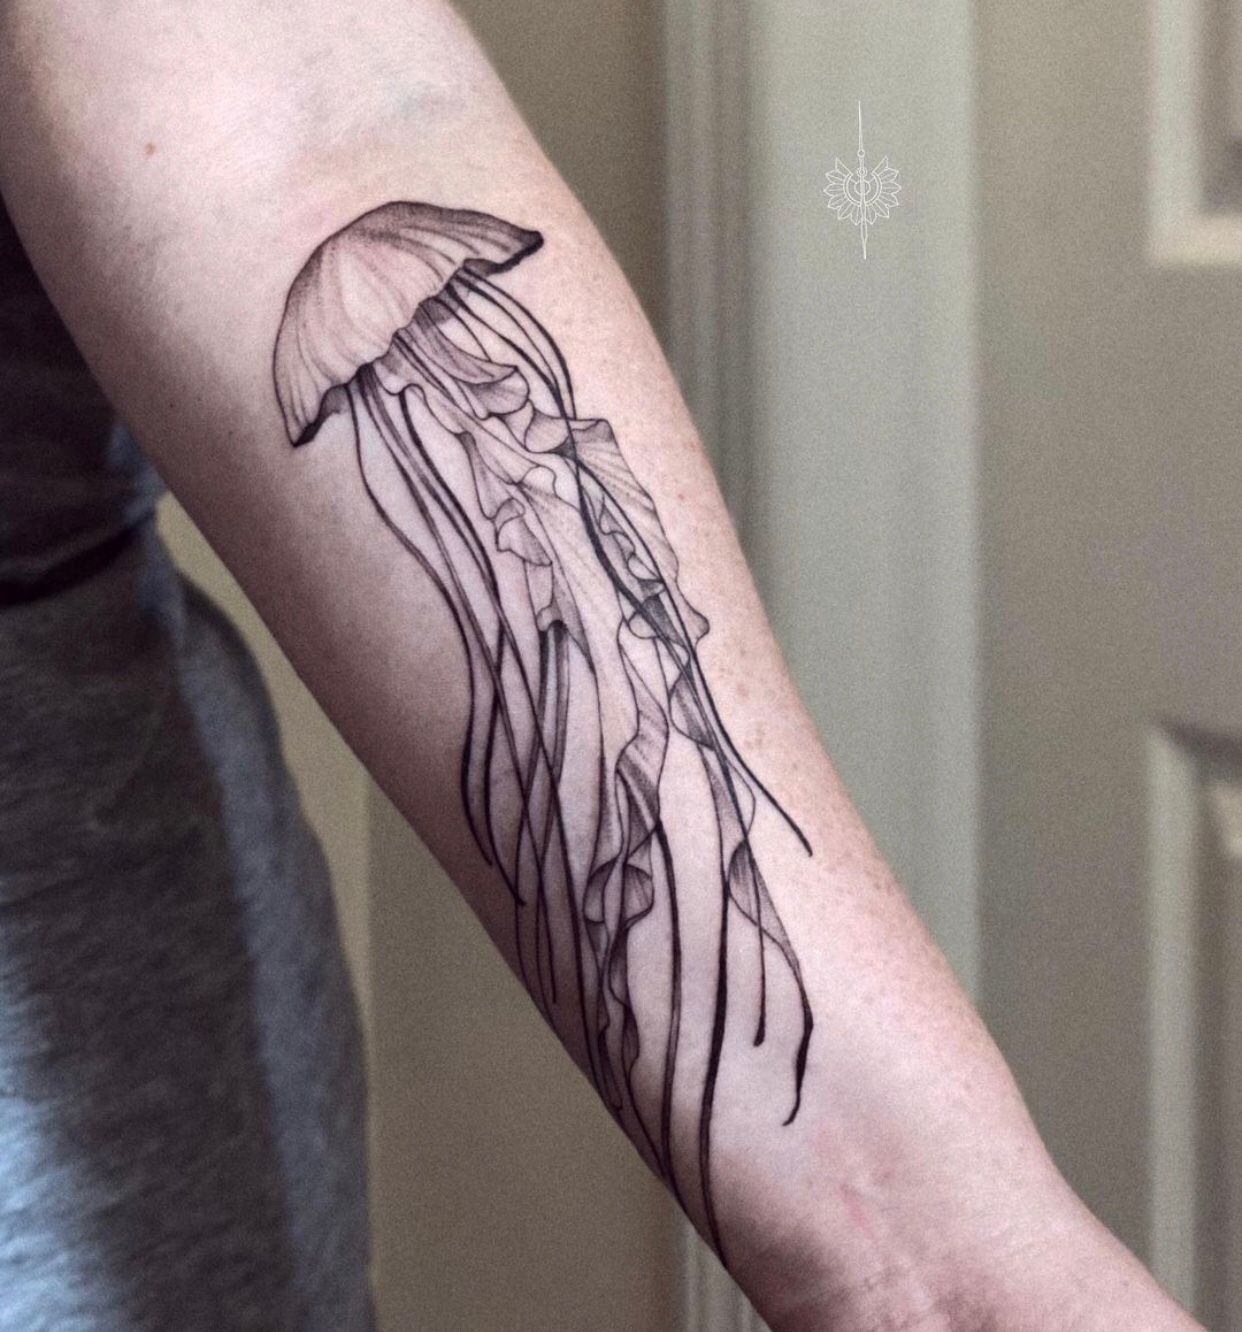 Whale and jellyfish by Arianna at Southern Gothic, Bournemouth UK : r/tattoo